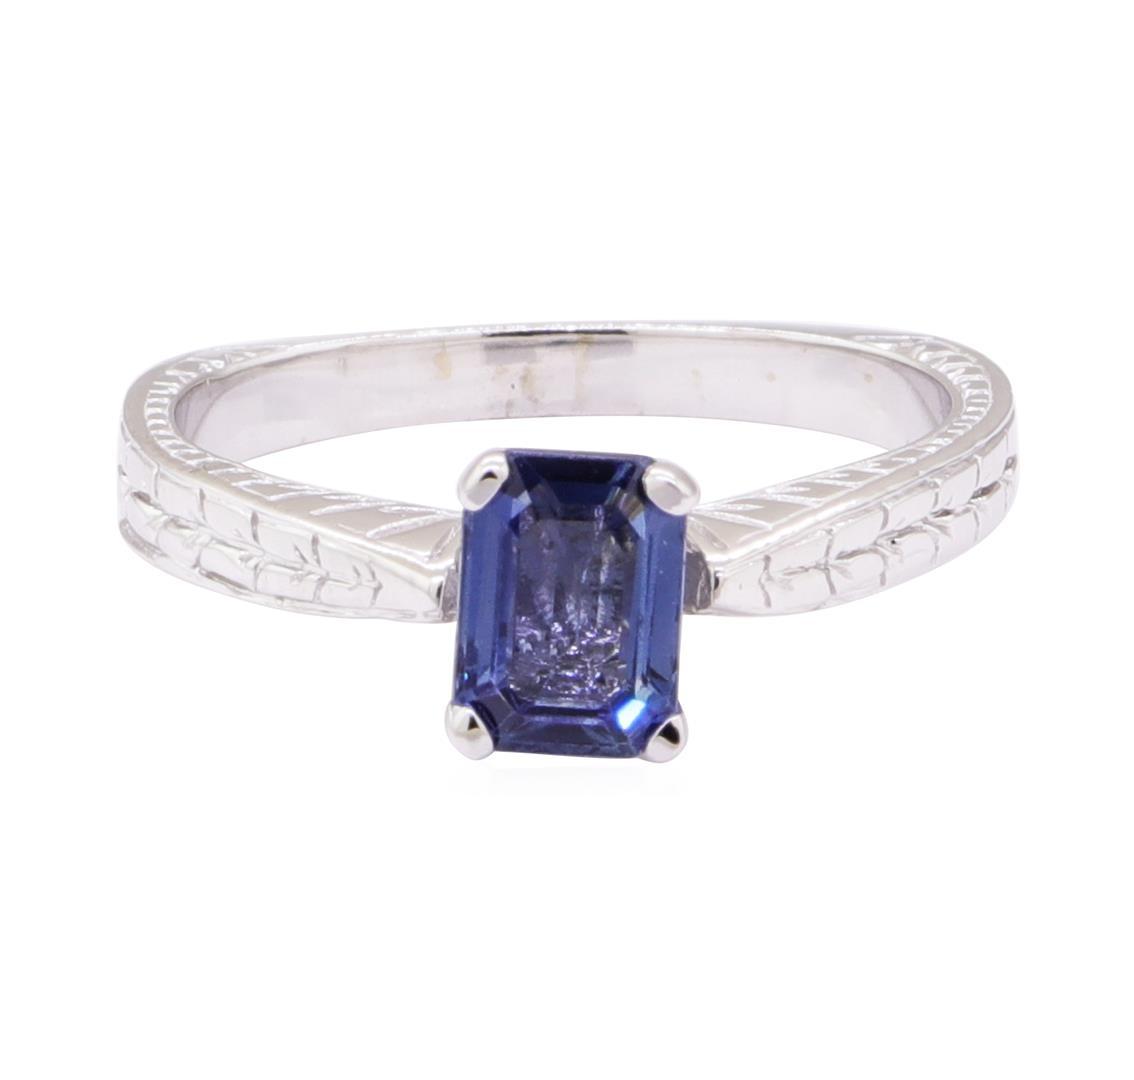 1.09 ctw Blue Sapphire Solitaire Ring - 14KT White Gold